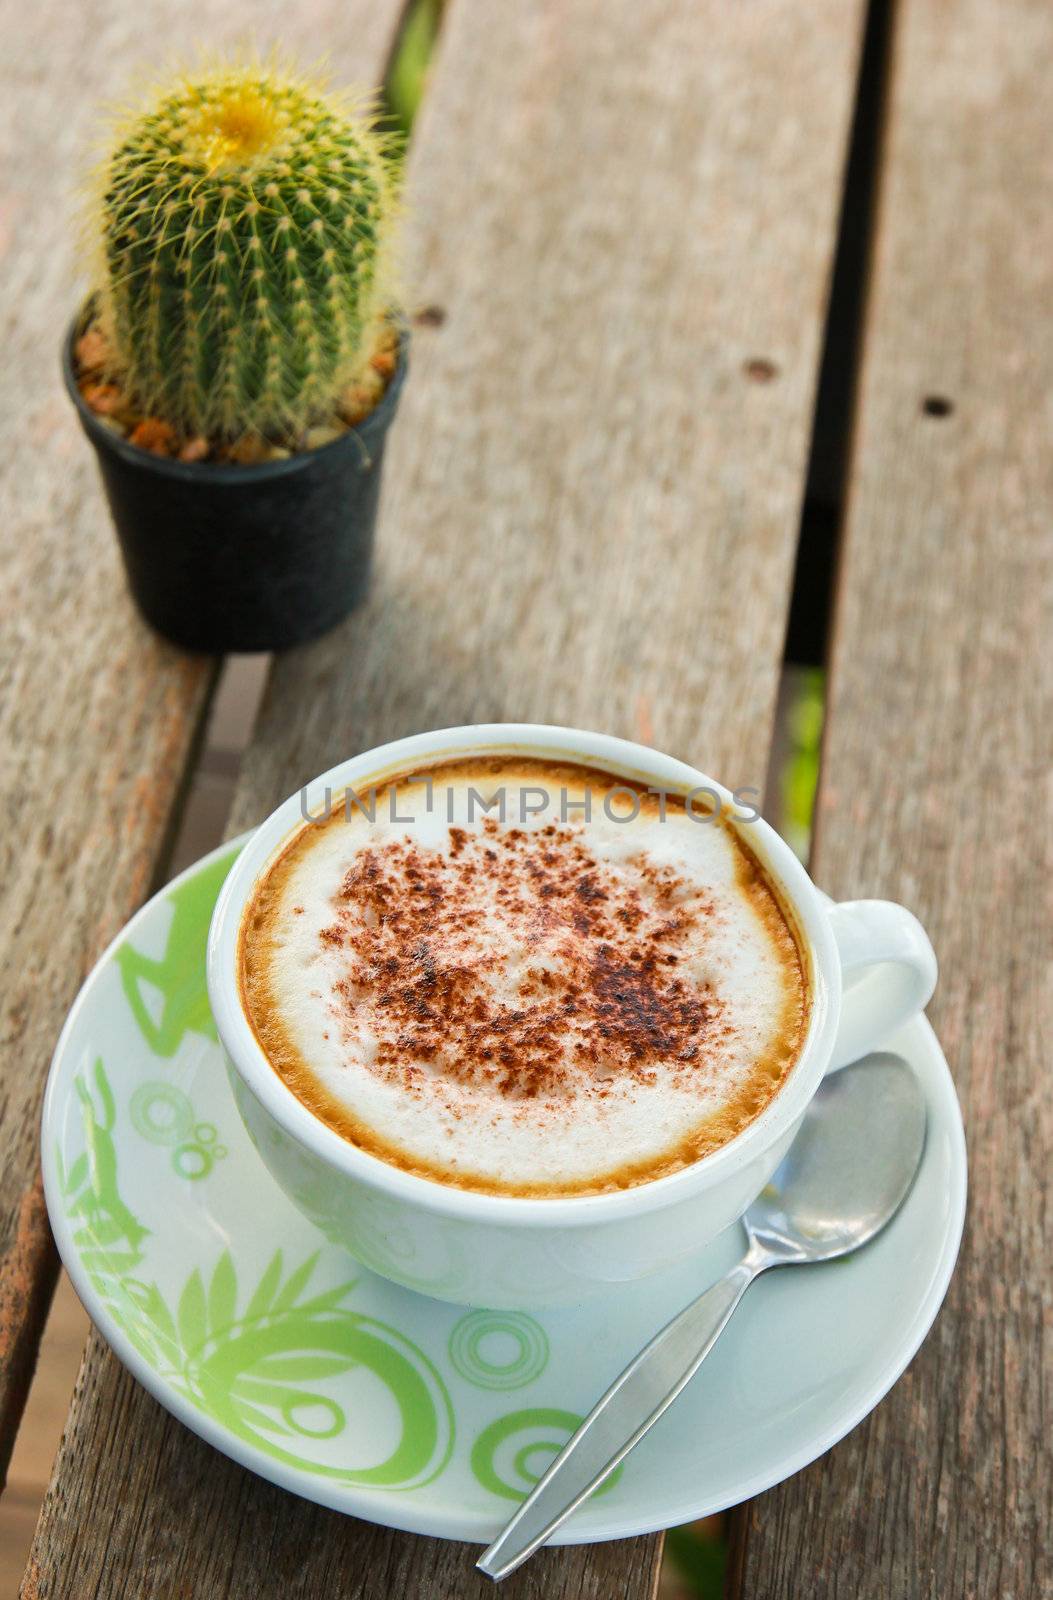 Coffee latte or cappuccino in a cup with cactus on wooden backgr by nuchylee